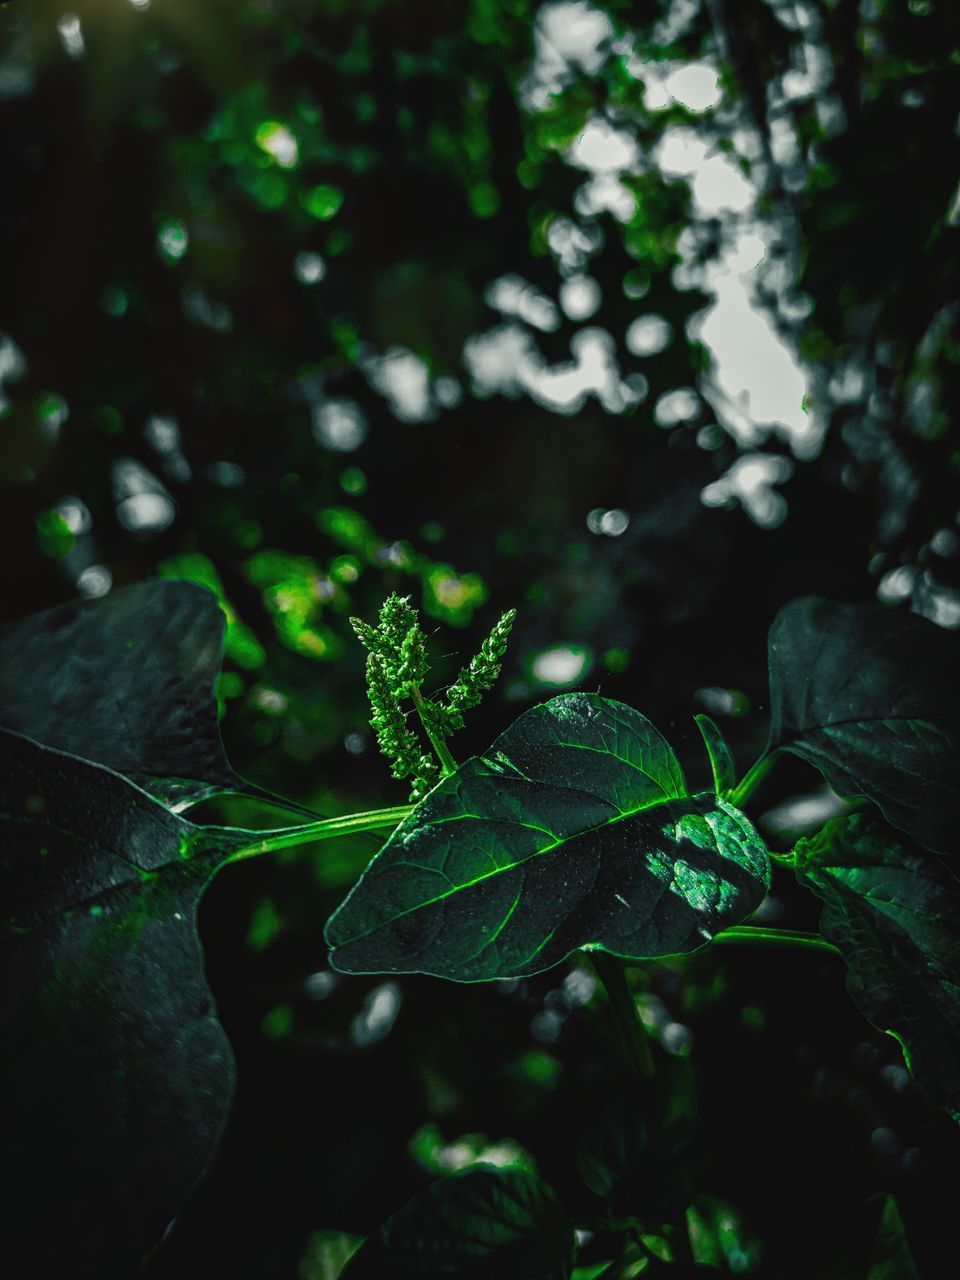 green, plant, leaf, nature, plant part, darkness, tree, branch, sunlight, light, forest, growth, beauty in nature, close-up, no people, outdoors, flower, focus on foreground, animal, land, animal wildlife, day, jungle, macro photography, animal themes, freshness, environment, insect, selective focus